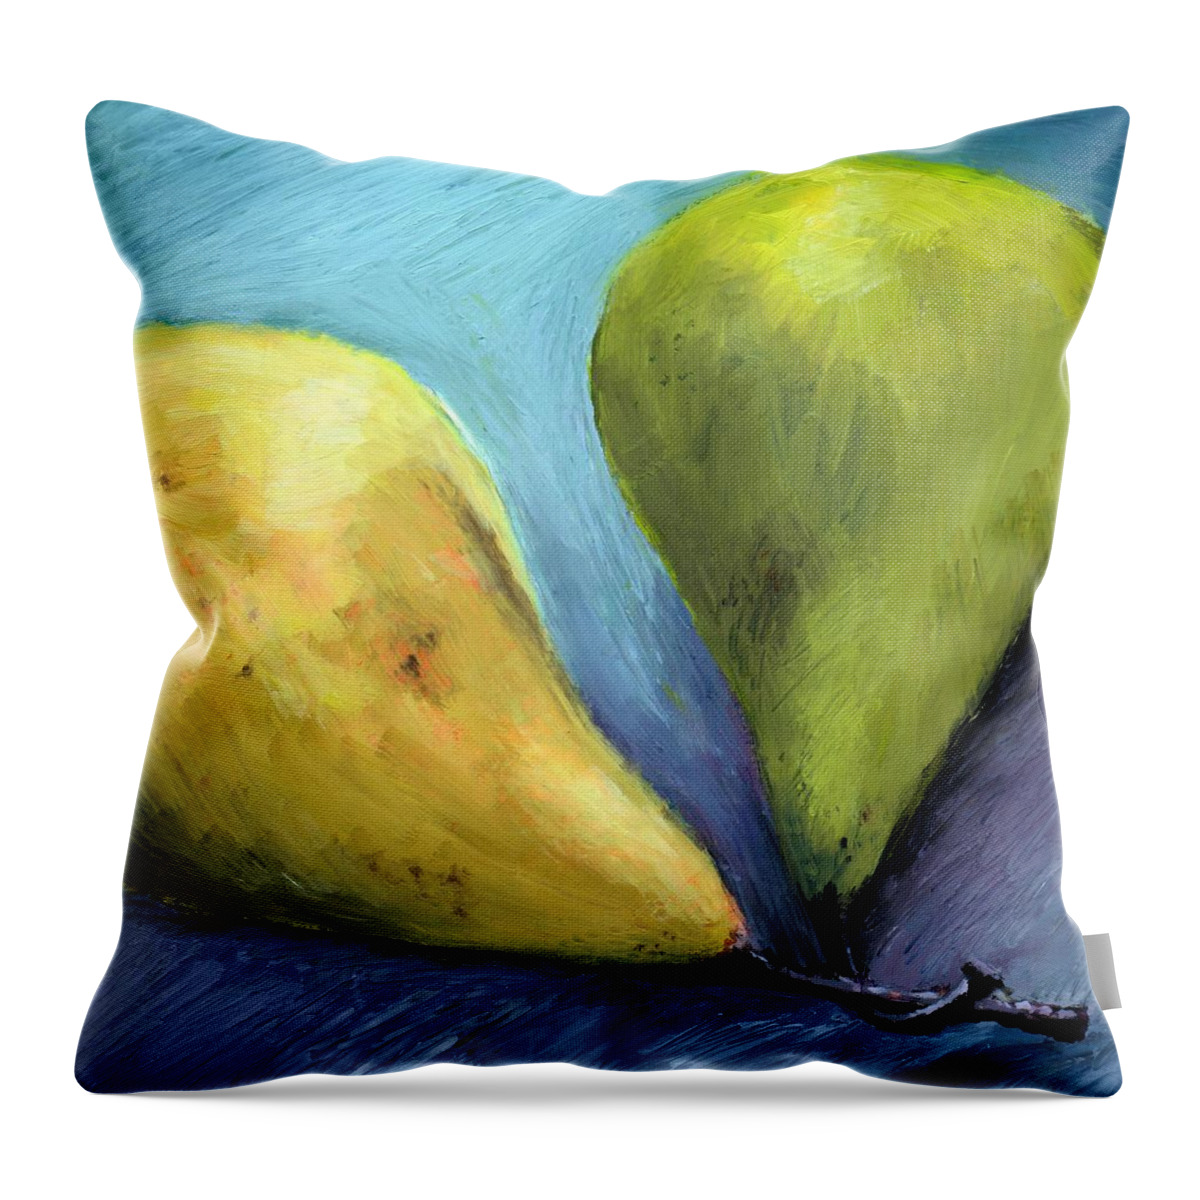 Pear Throw Pillow featuring the painting Two Pears Still Life by Michelle Calkins